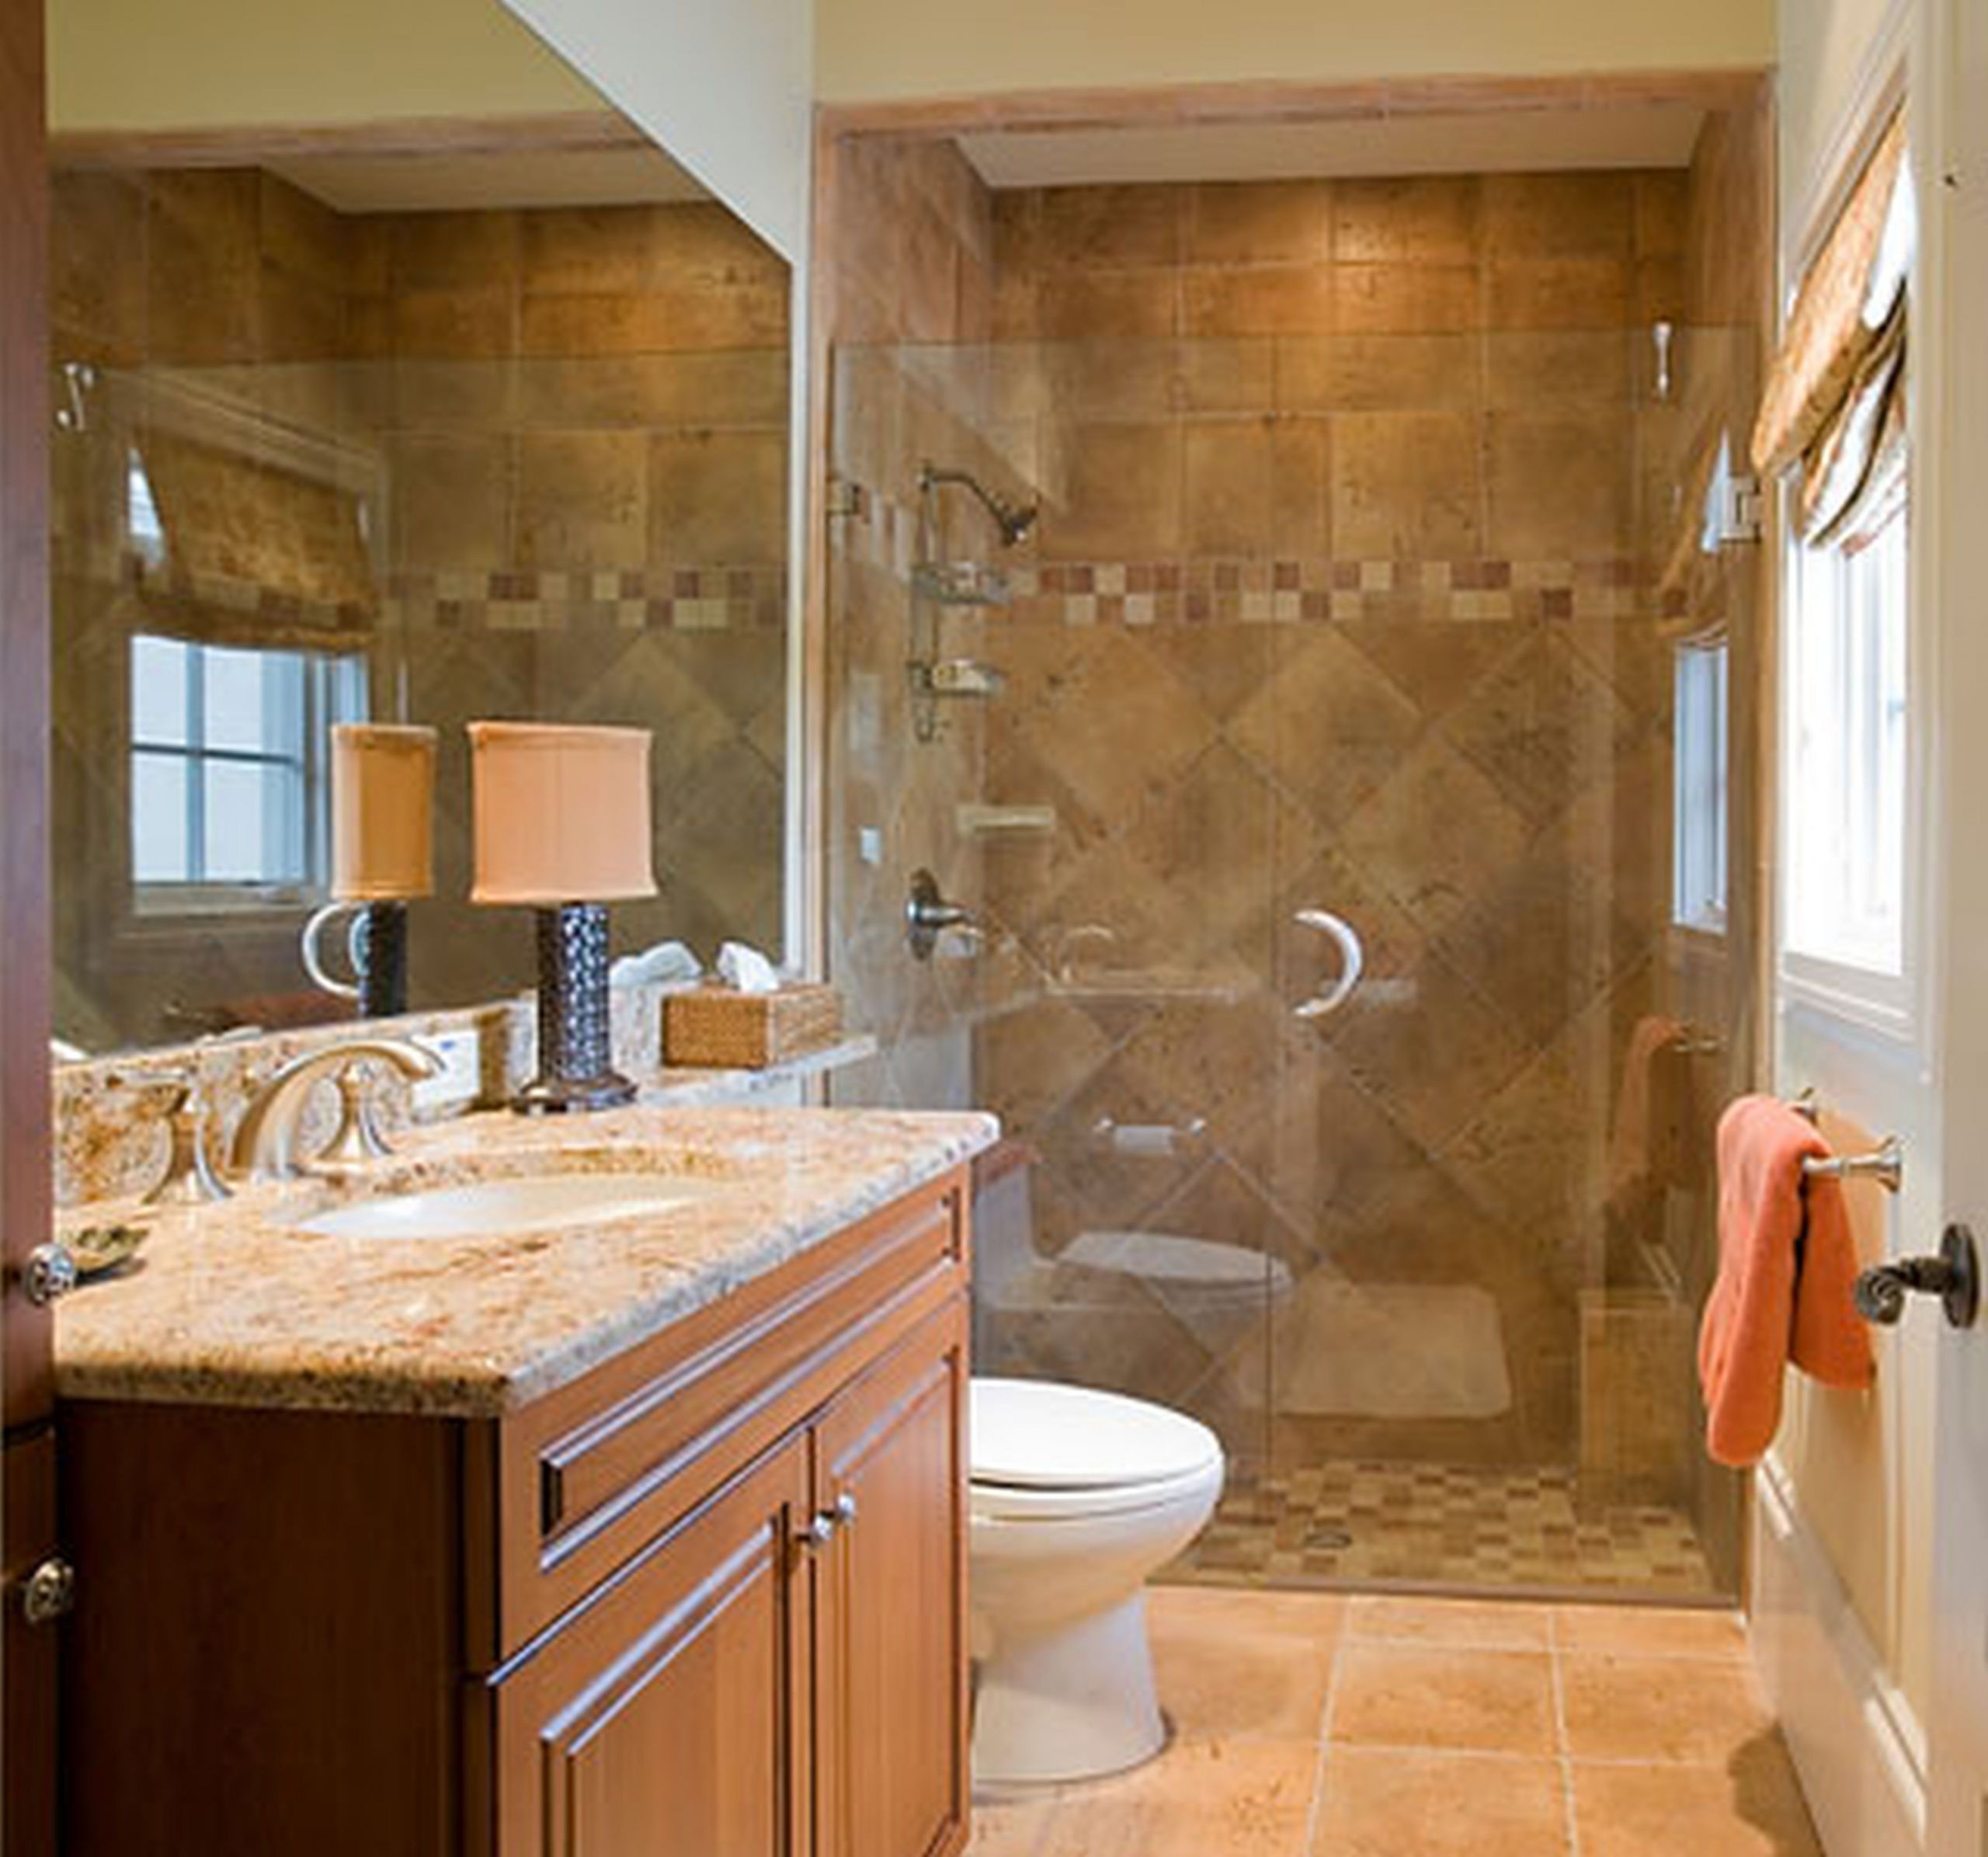 Renovate A Small Bathroom
 Small Bathroom Remodel Ideas in Varied Modern Concepts